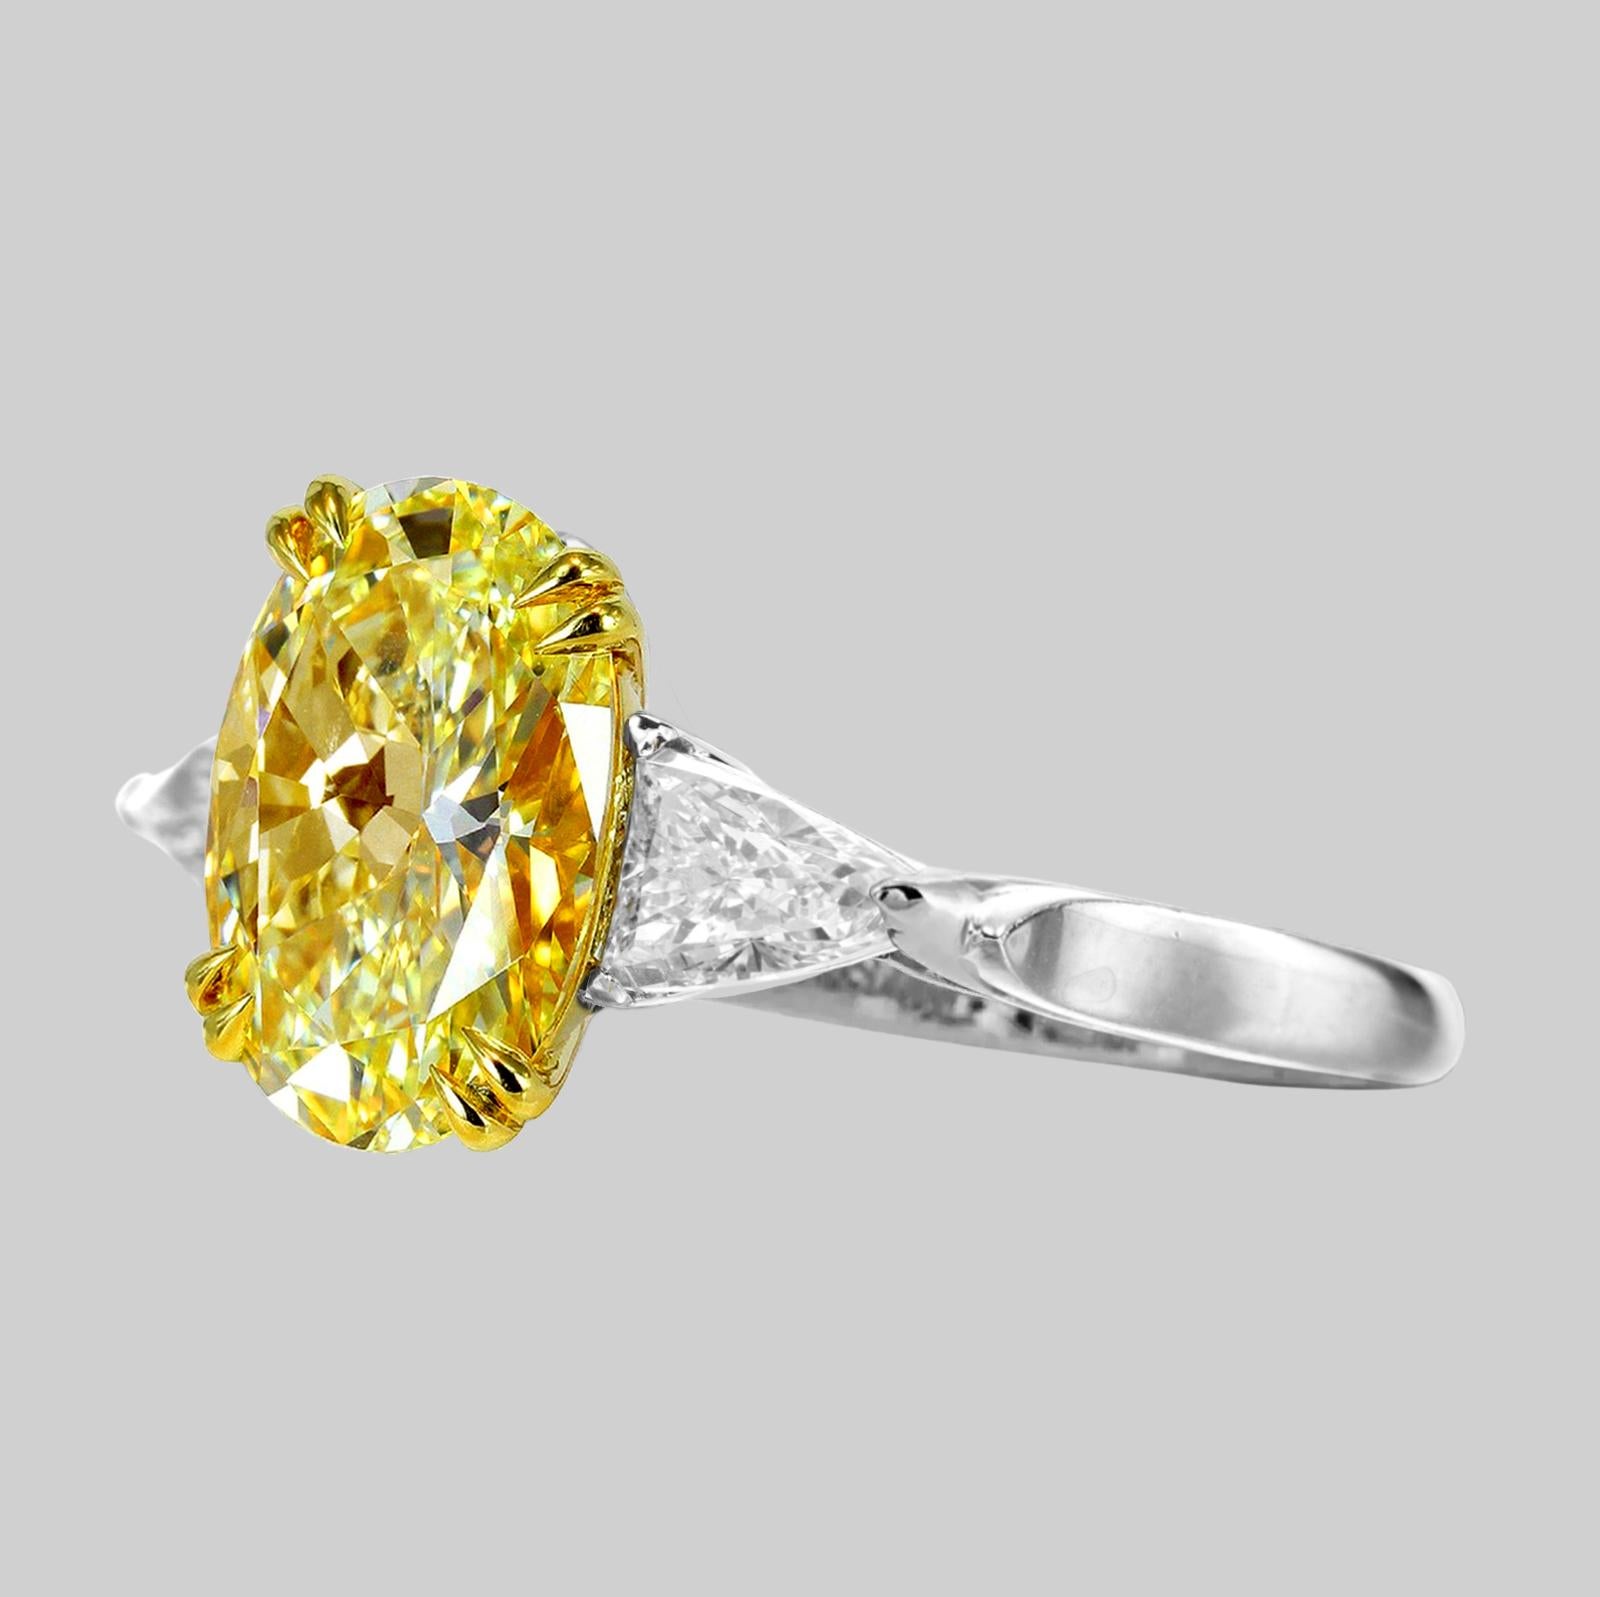 Step into the realm of unparalleled luxury with our latest masterpiece: a breathtaking 12.68 carat fancy yellow oval diamond ring, set in solid platinum and accompanied by two exquisite tapered baguettes.

This extraordinary ring is not just a piece